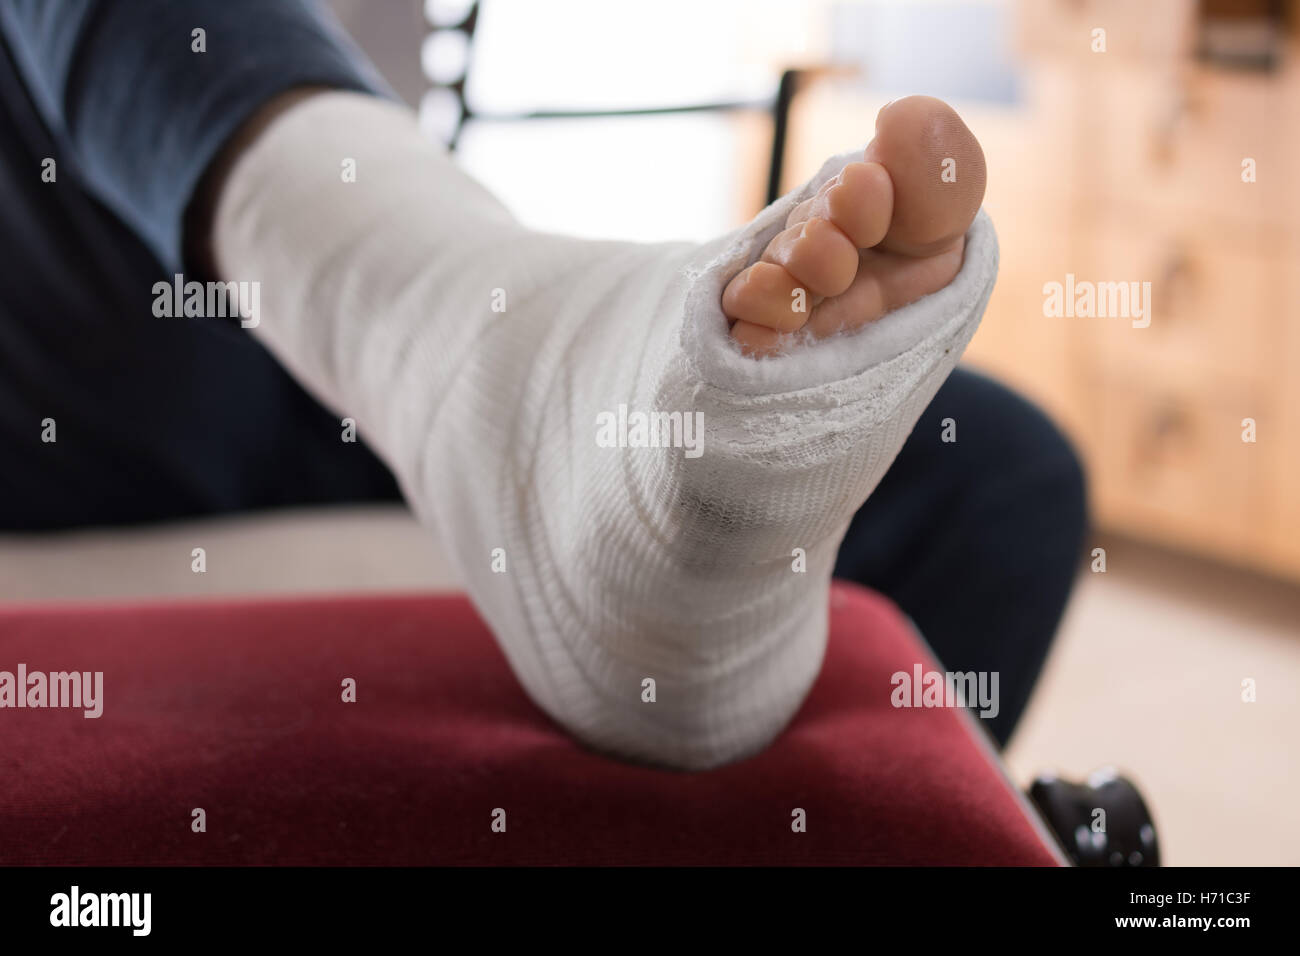 Close up of a young man's fiberglass / Plaster leg cast and toes after a running injury Stock Photo